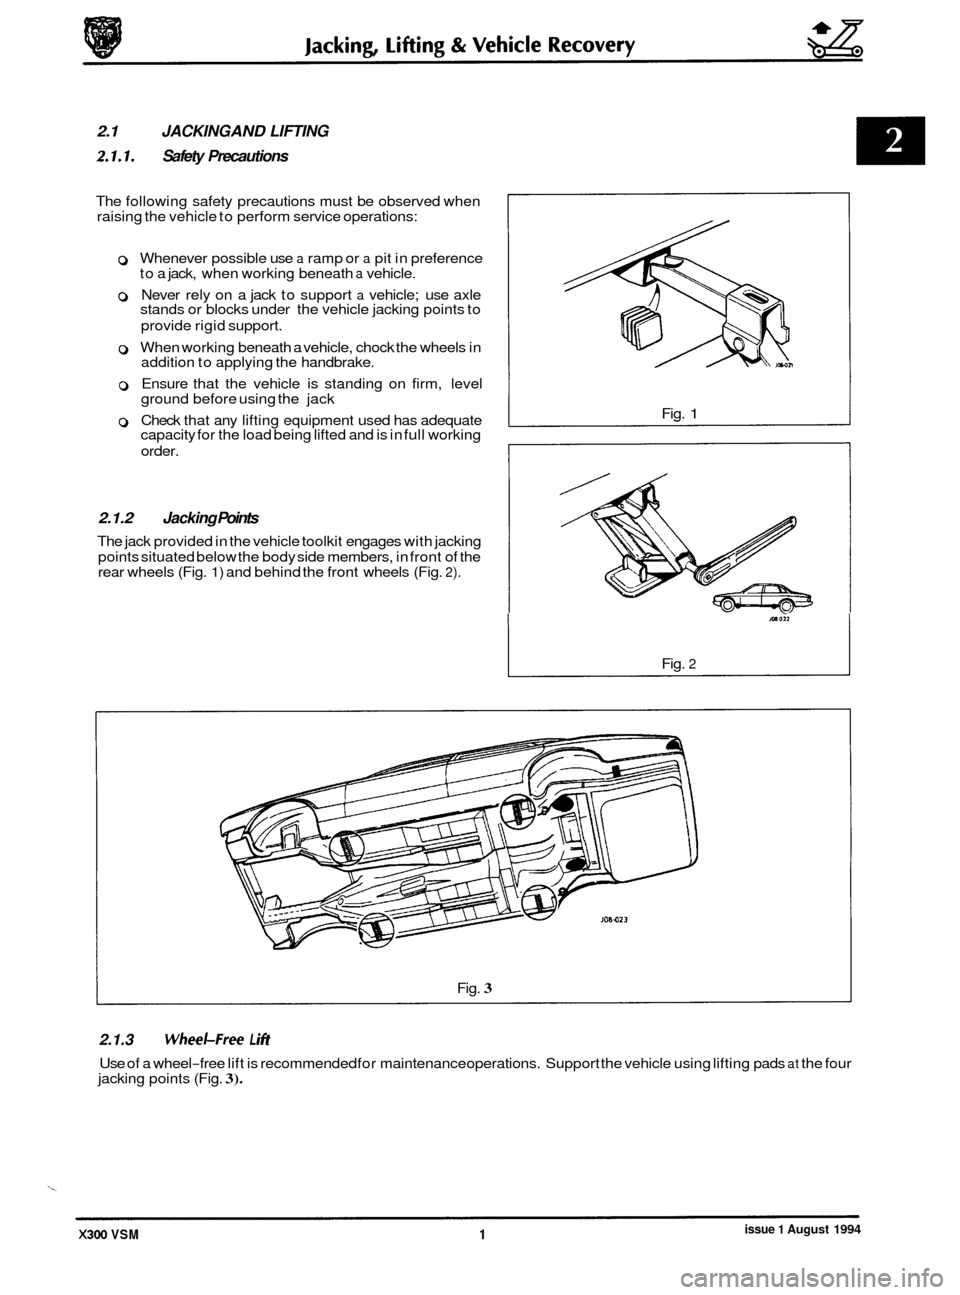 JAGUAR XJ6 1994 2.G Owners Guide 0 2.1 JACKING AND LIFTING 
2.1.1. Safety Precautions 
The following  safety  precautions must  be observed  when 
raising the vehicle  to perform  service operations: 
0 Whenever  possible use a ramp 